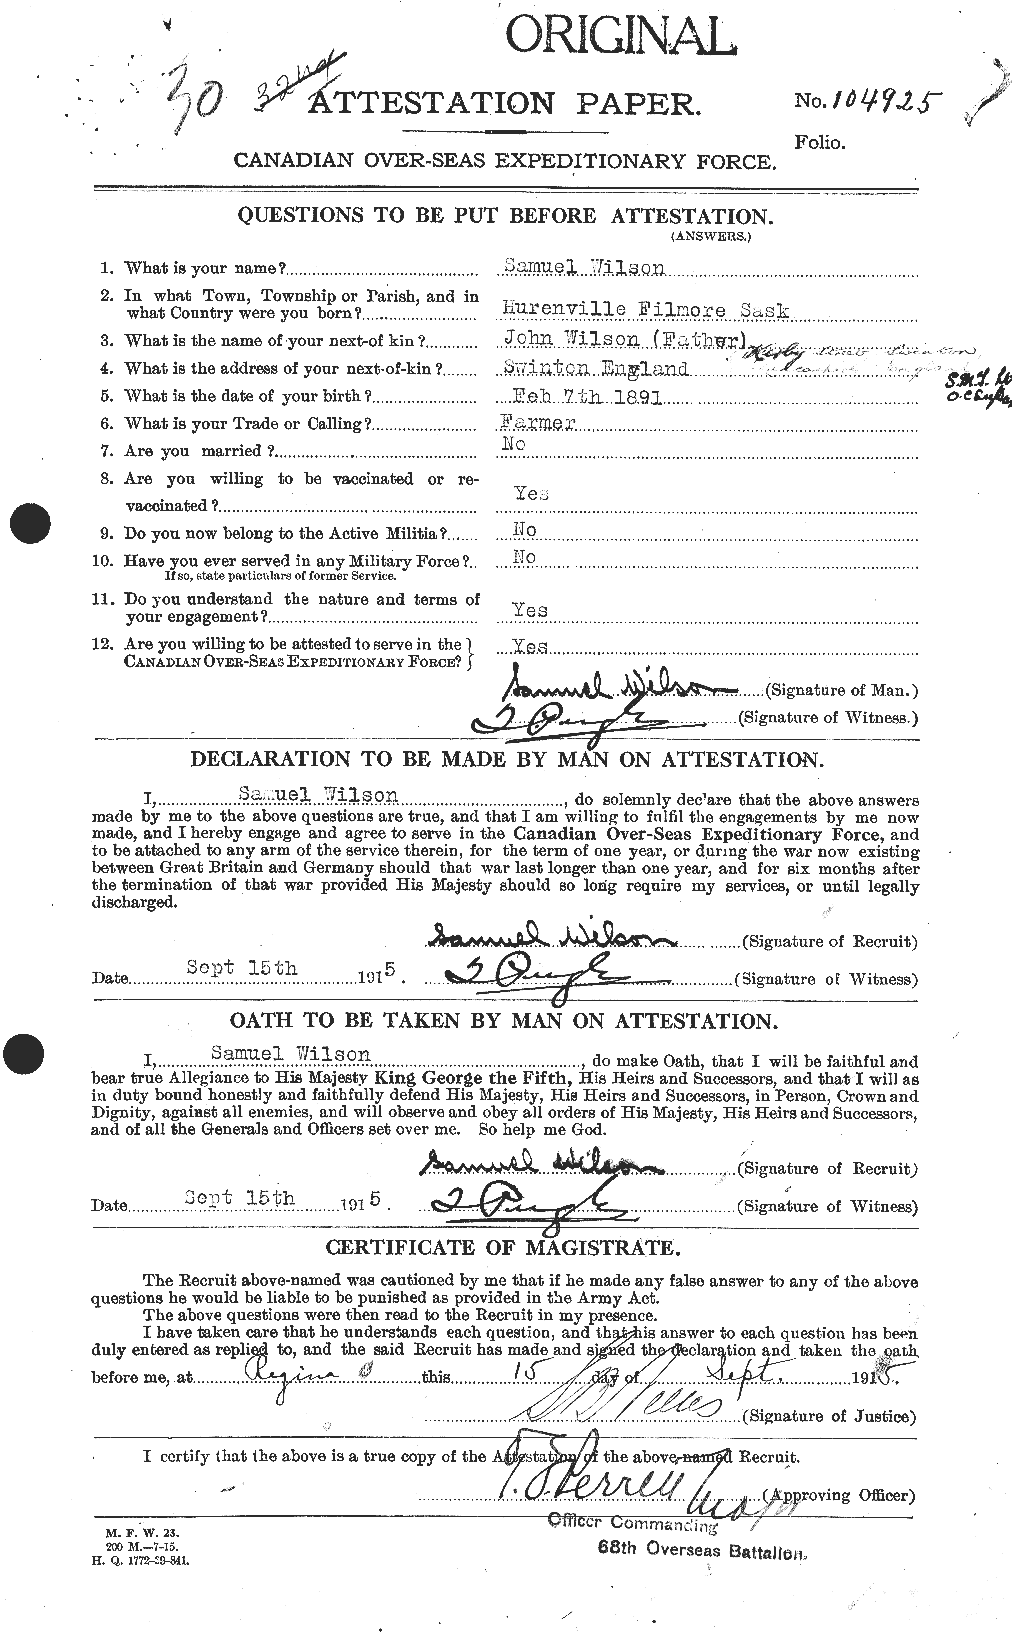 Personnel Records of the First World War - CEF 681096a